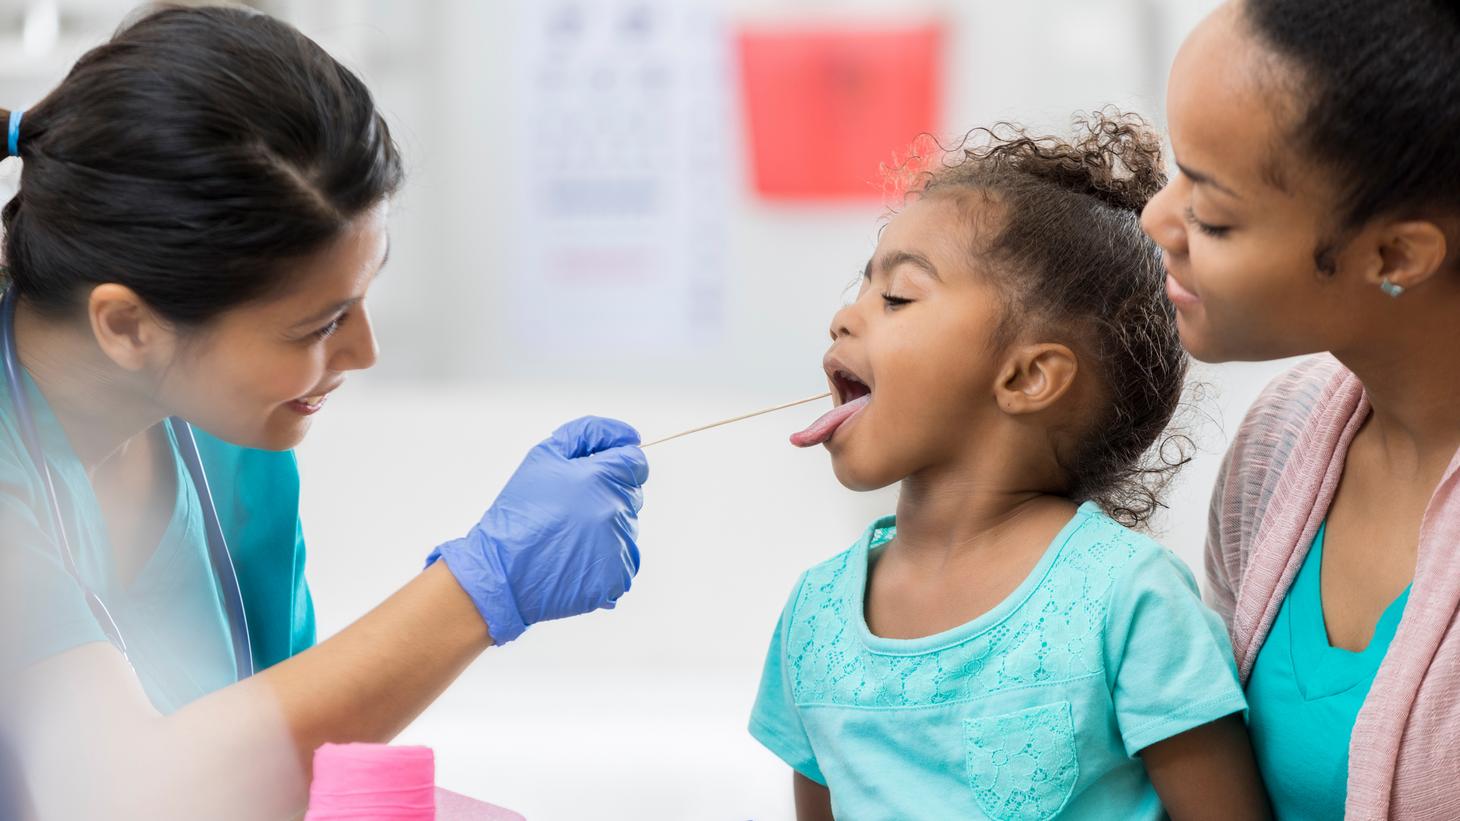 Nurse looking inside a child's mouth.